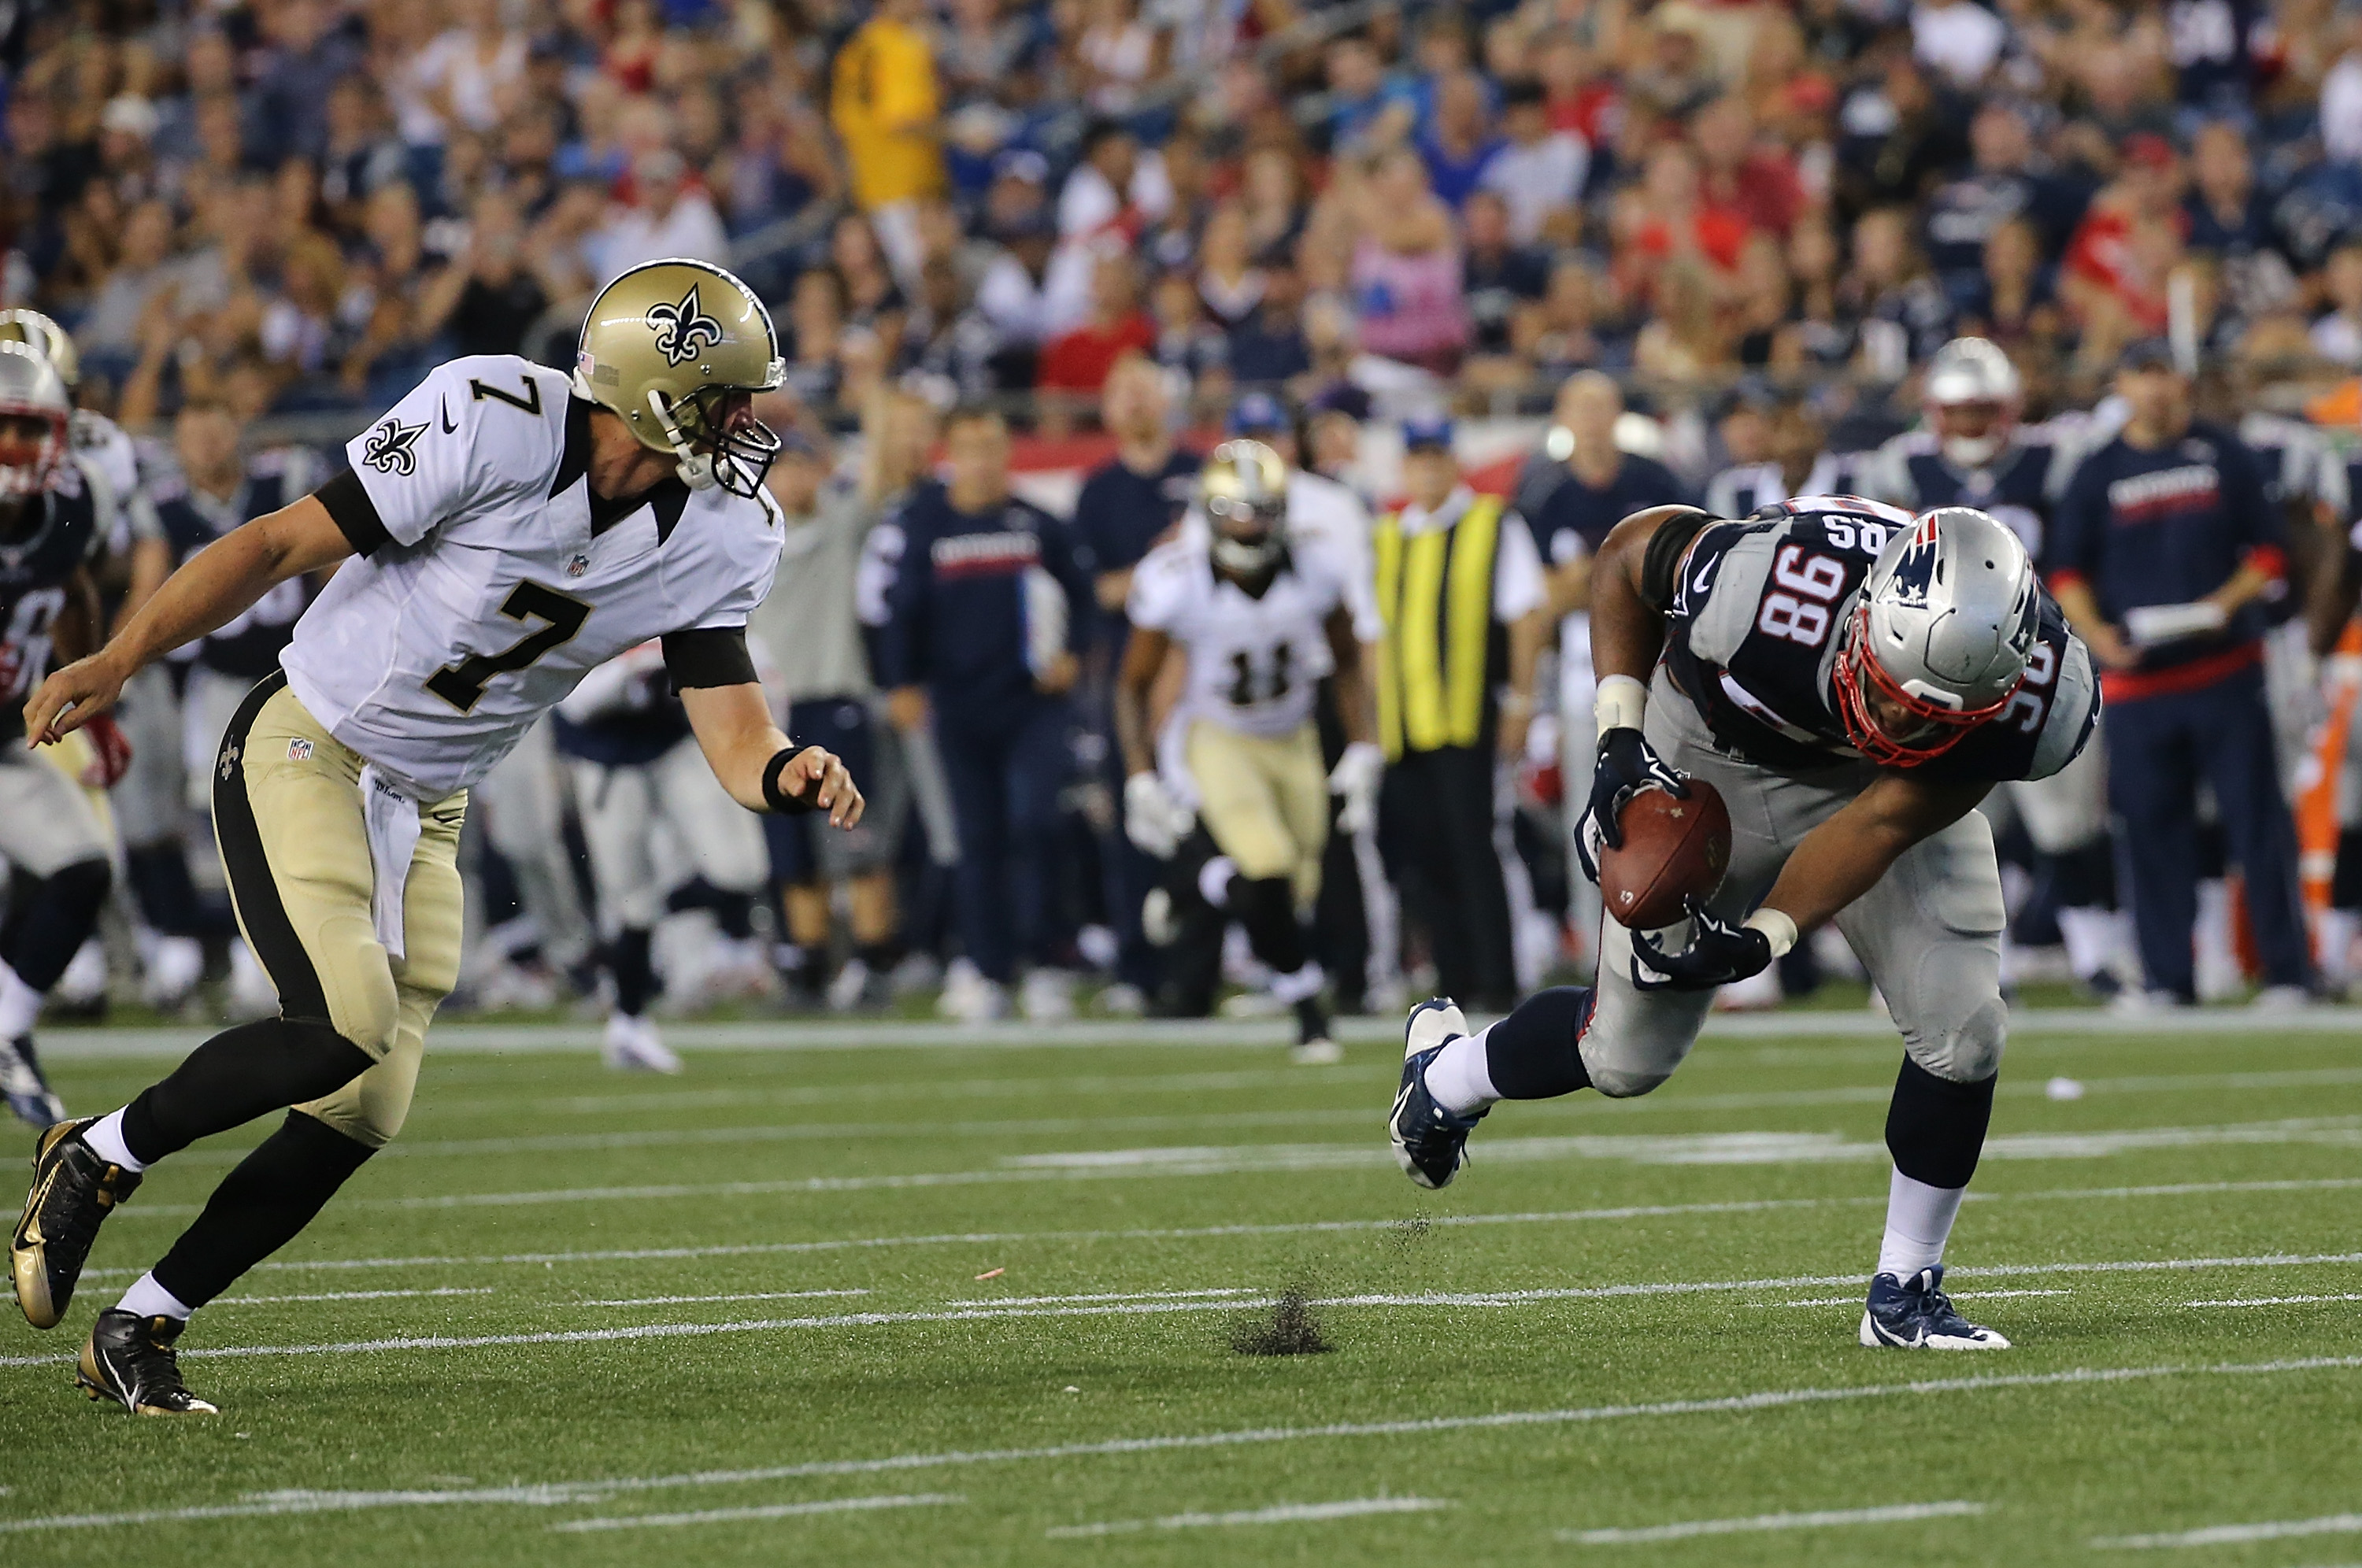 Trey Flowers #98 of the New England Patriots recovers a fumble as Luke McCown #7 of the New Orleans Saints looks on in the second half of a preseason game at Gillette Stadium on August 11, 2016. (Photo by Jim Rogash/Getty Images)